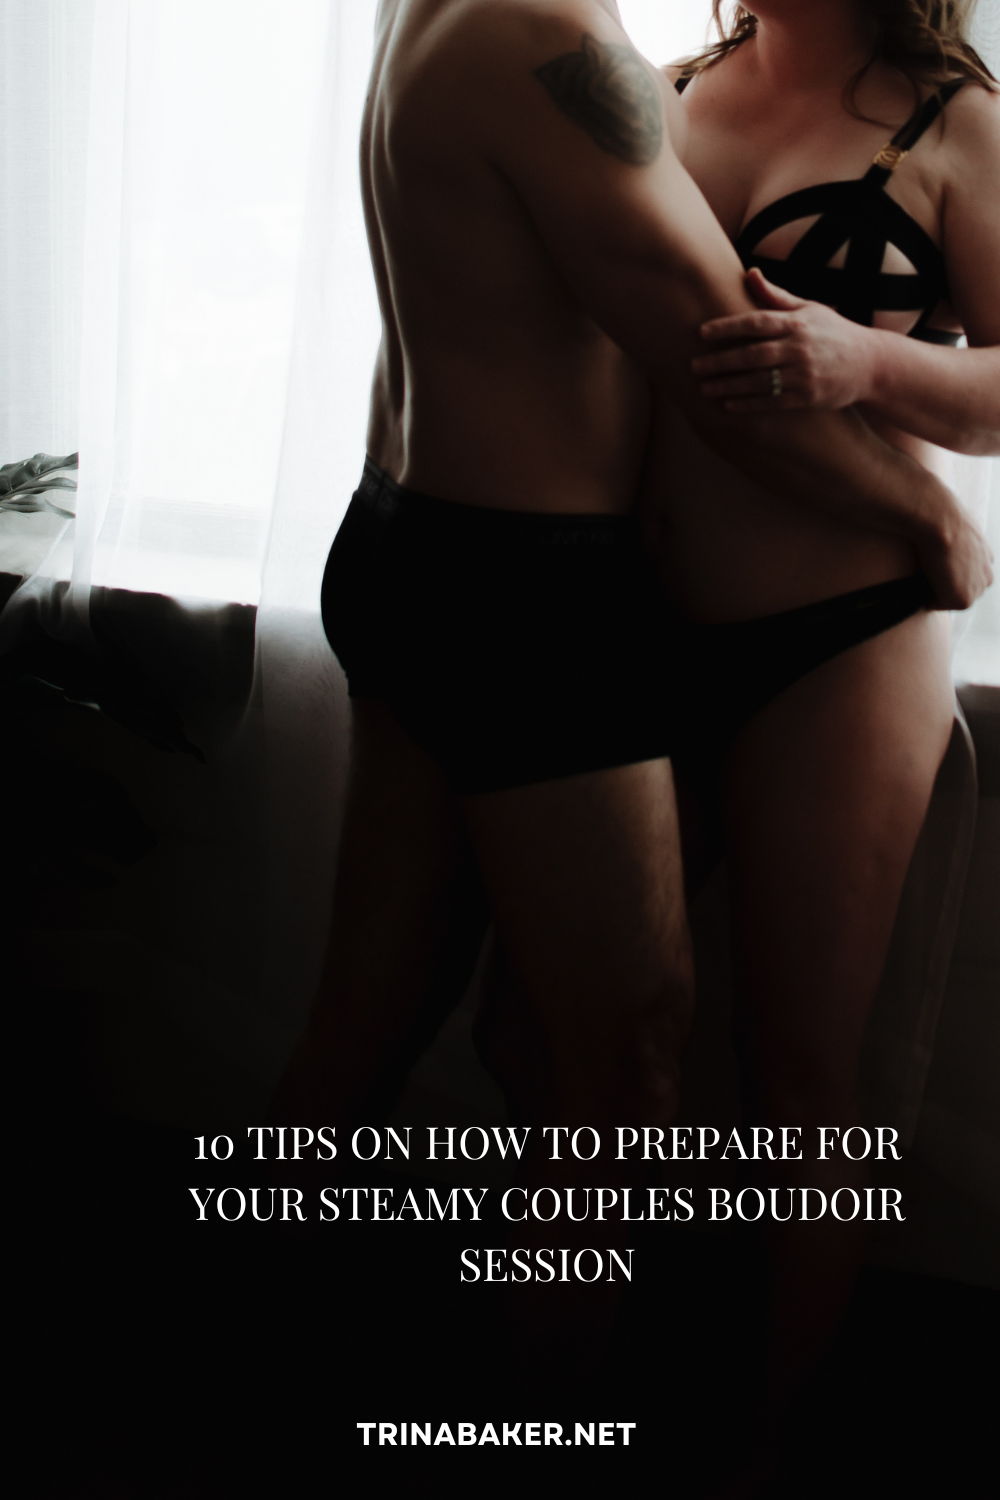 10 Tips On How to Prepare for Your Steamy Couples Boudoir Session